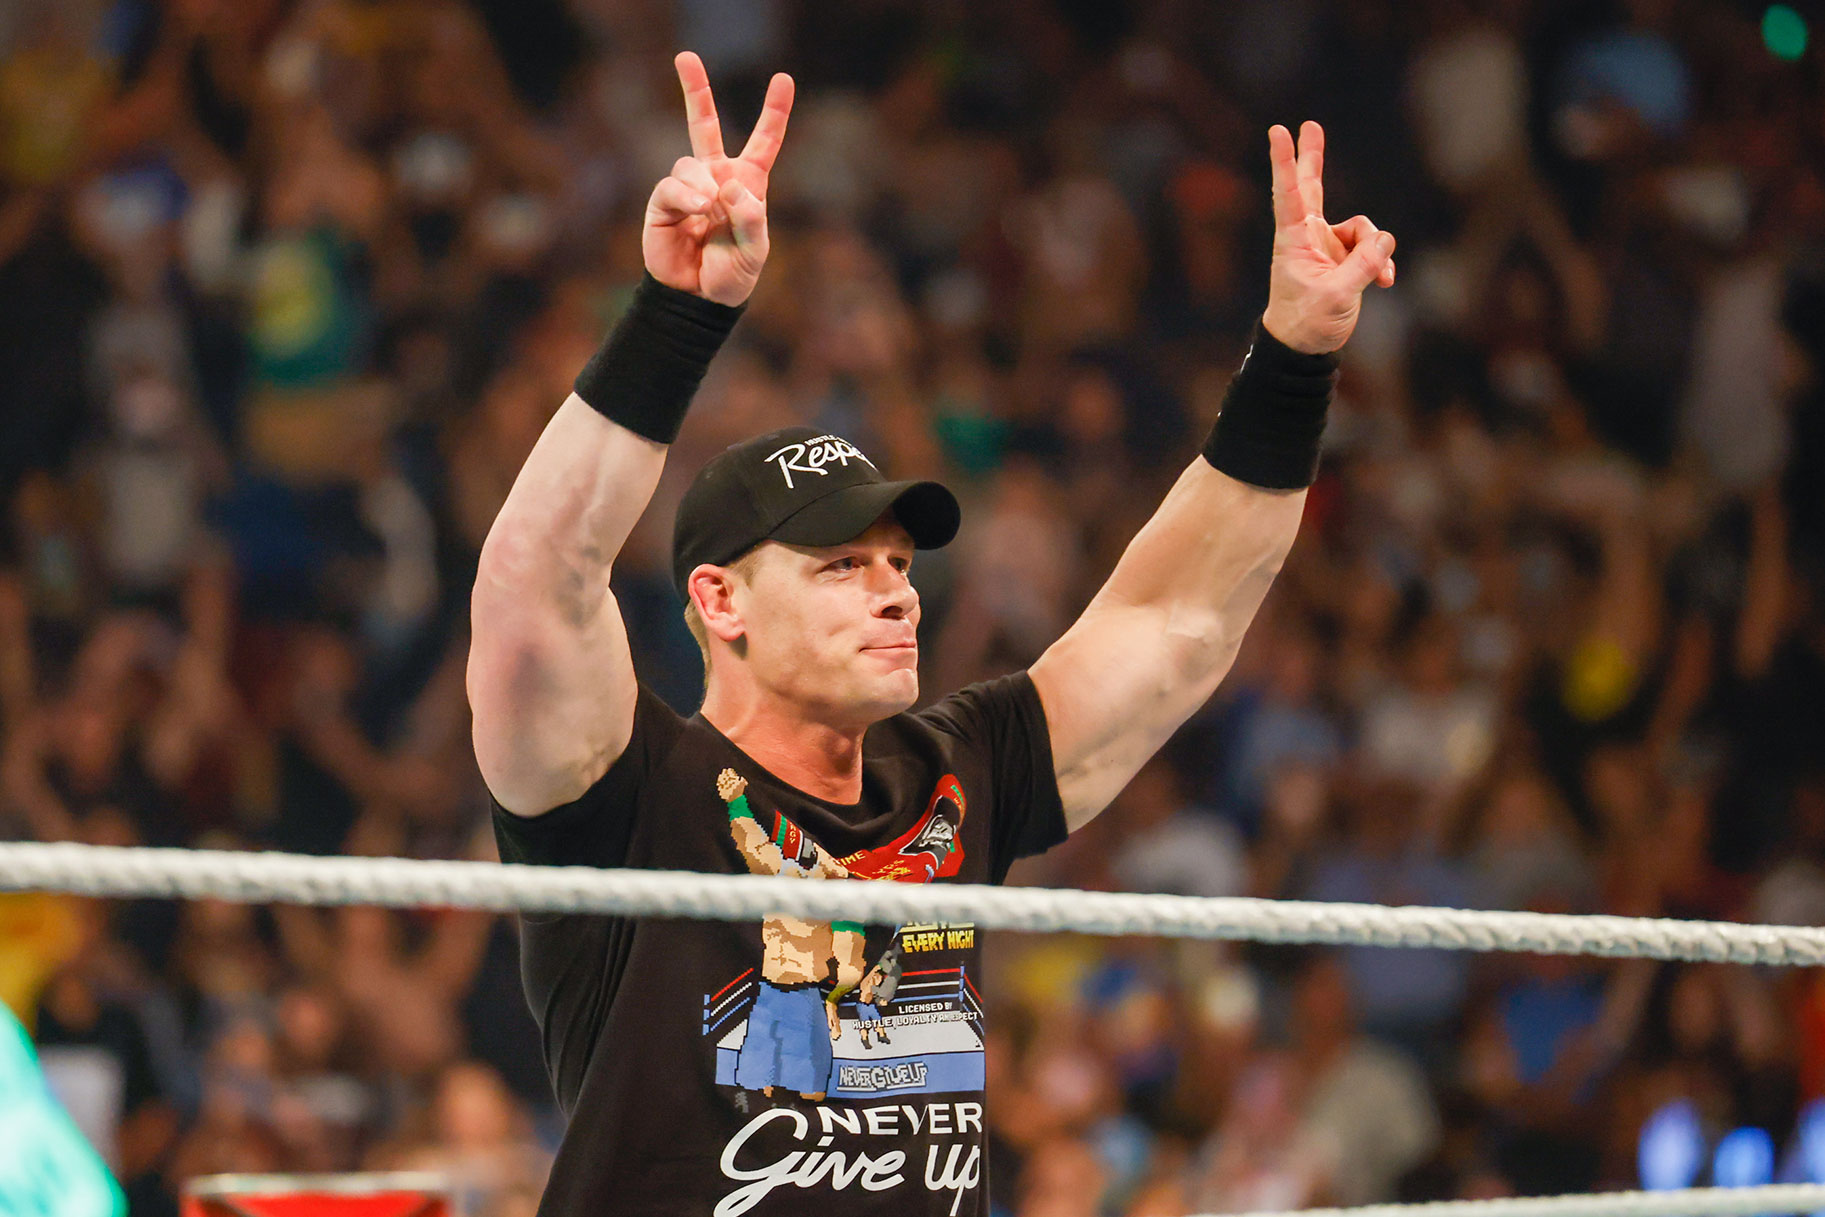 John Cena Reflects on His Past Feud with The Rock A Lesson in Humility and Apology